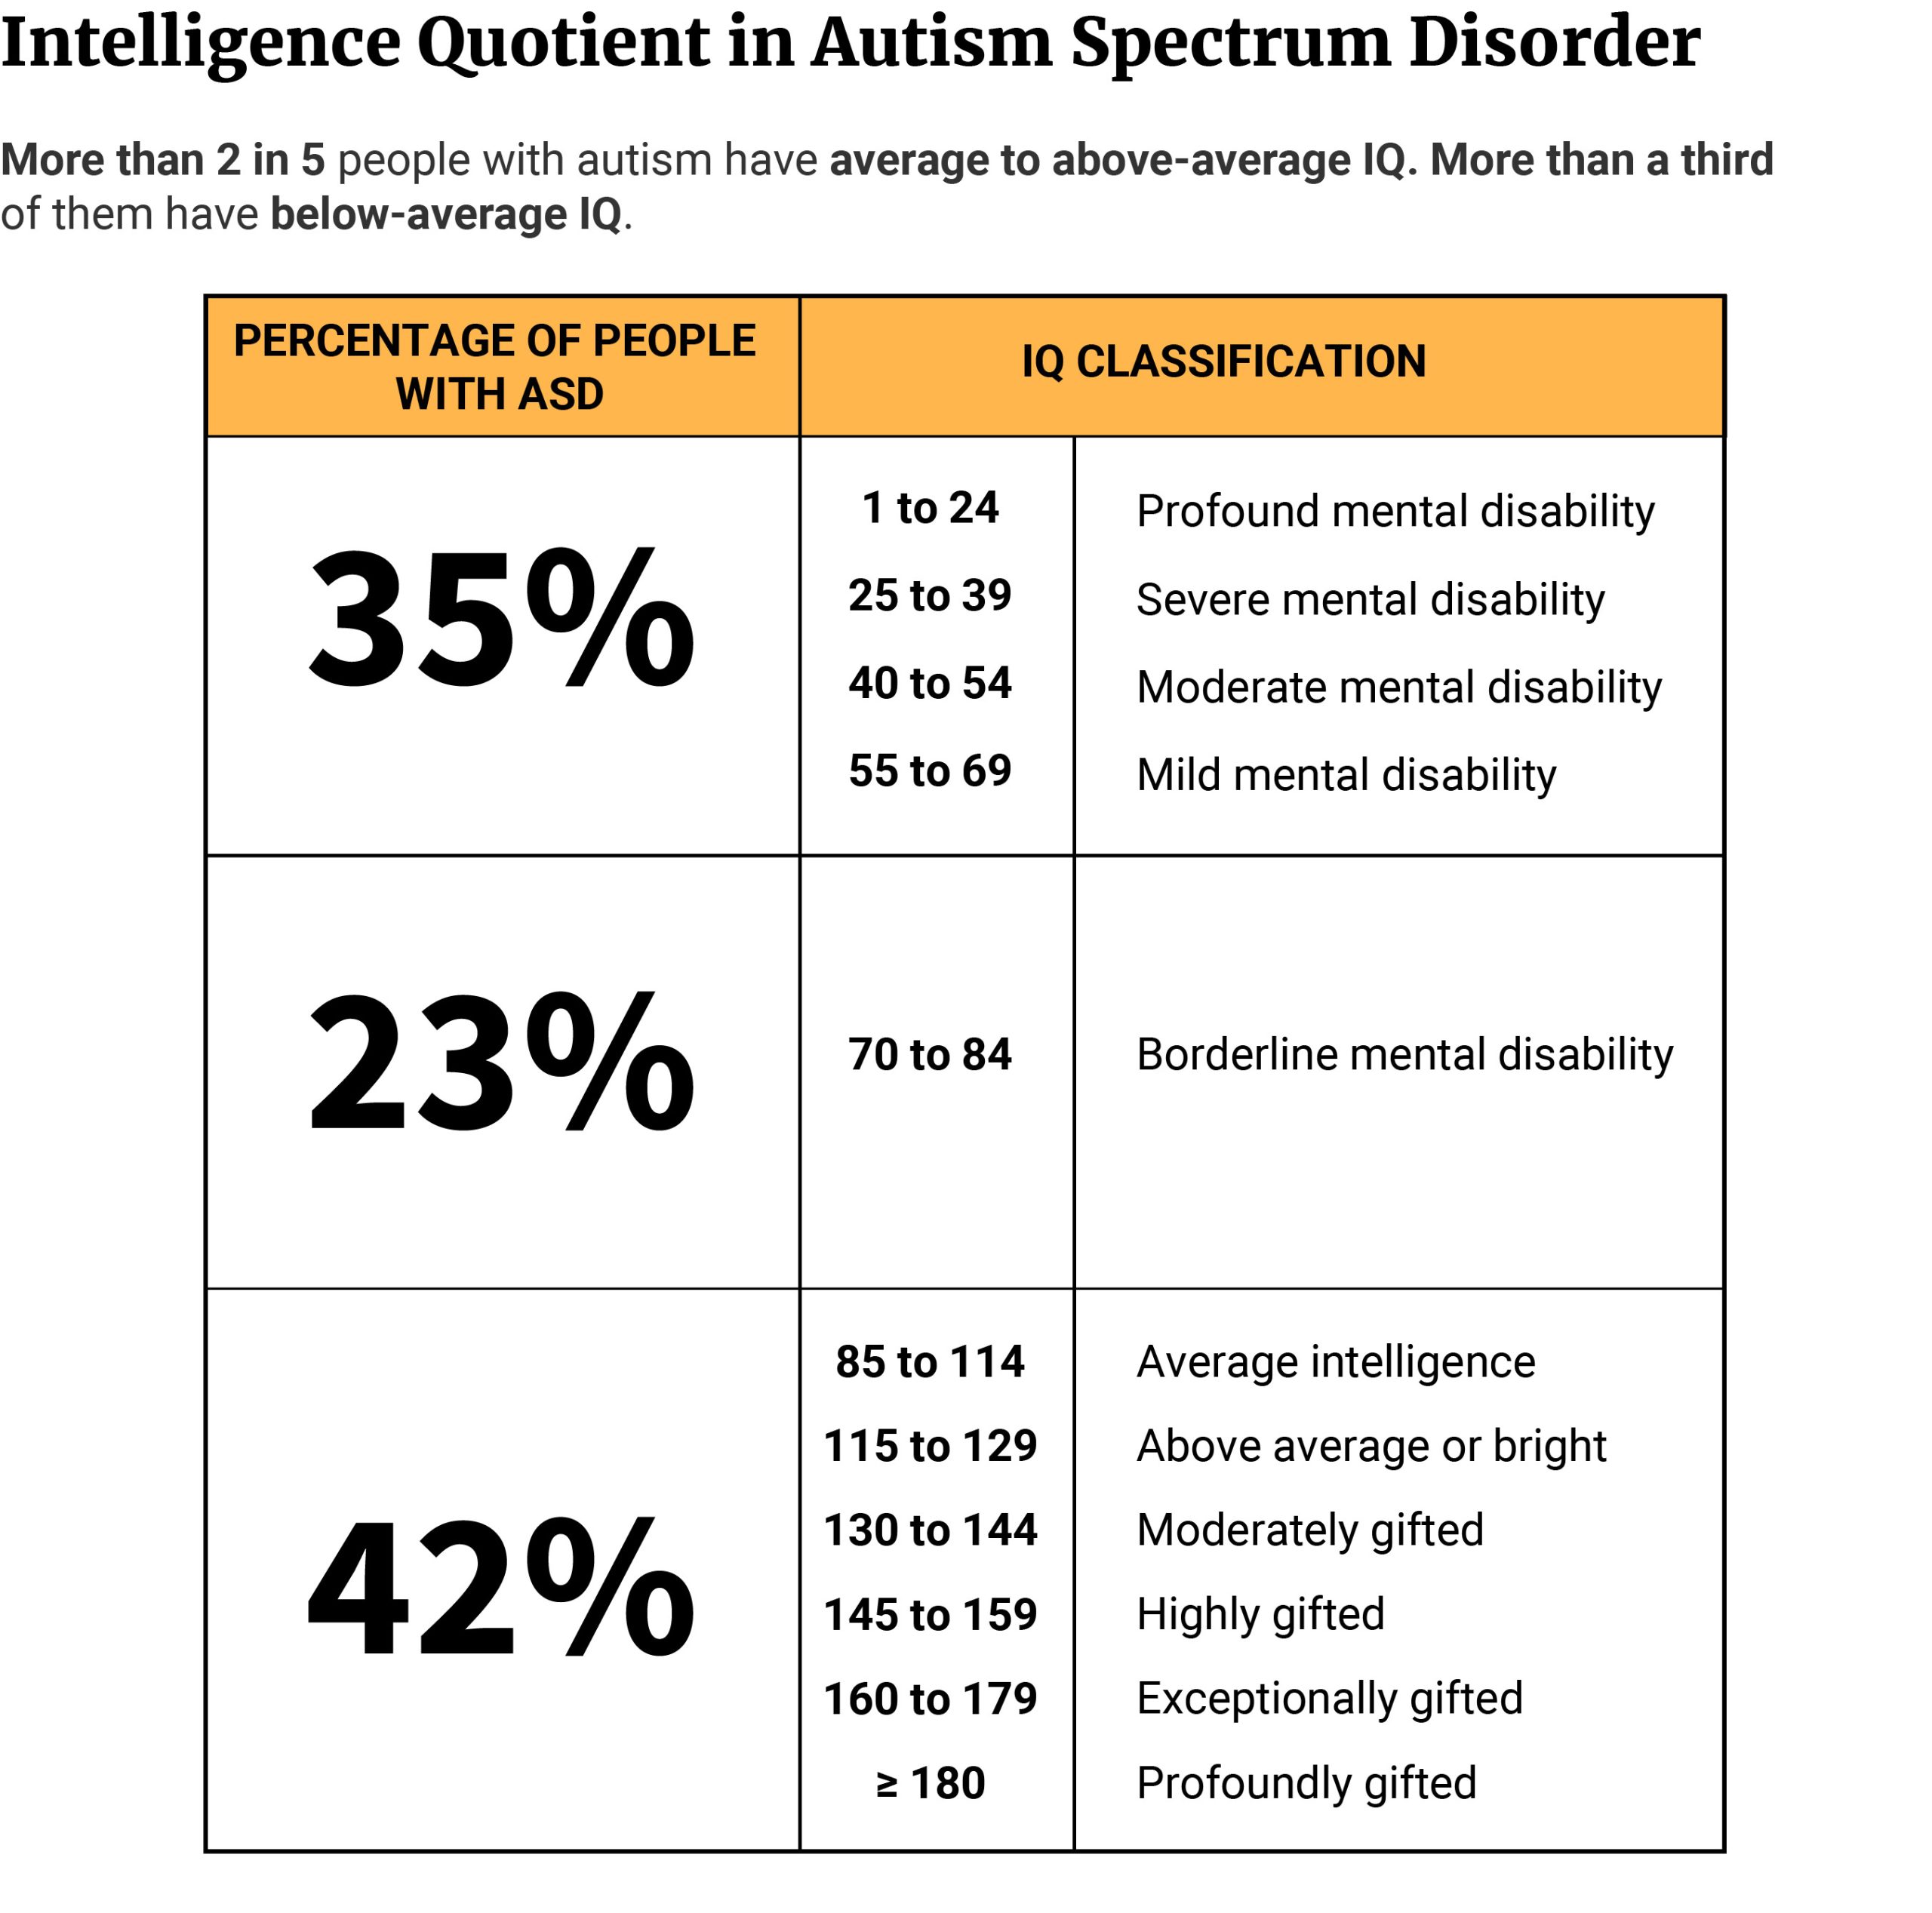 Table showing 41.7% people with autism have IQ above 85, 35.2% have IQ below 70, and 23.1% have IQ of 71-85.